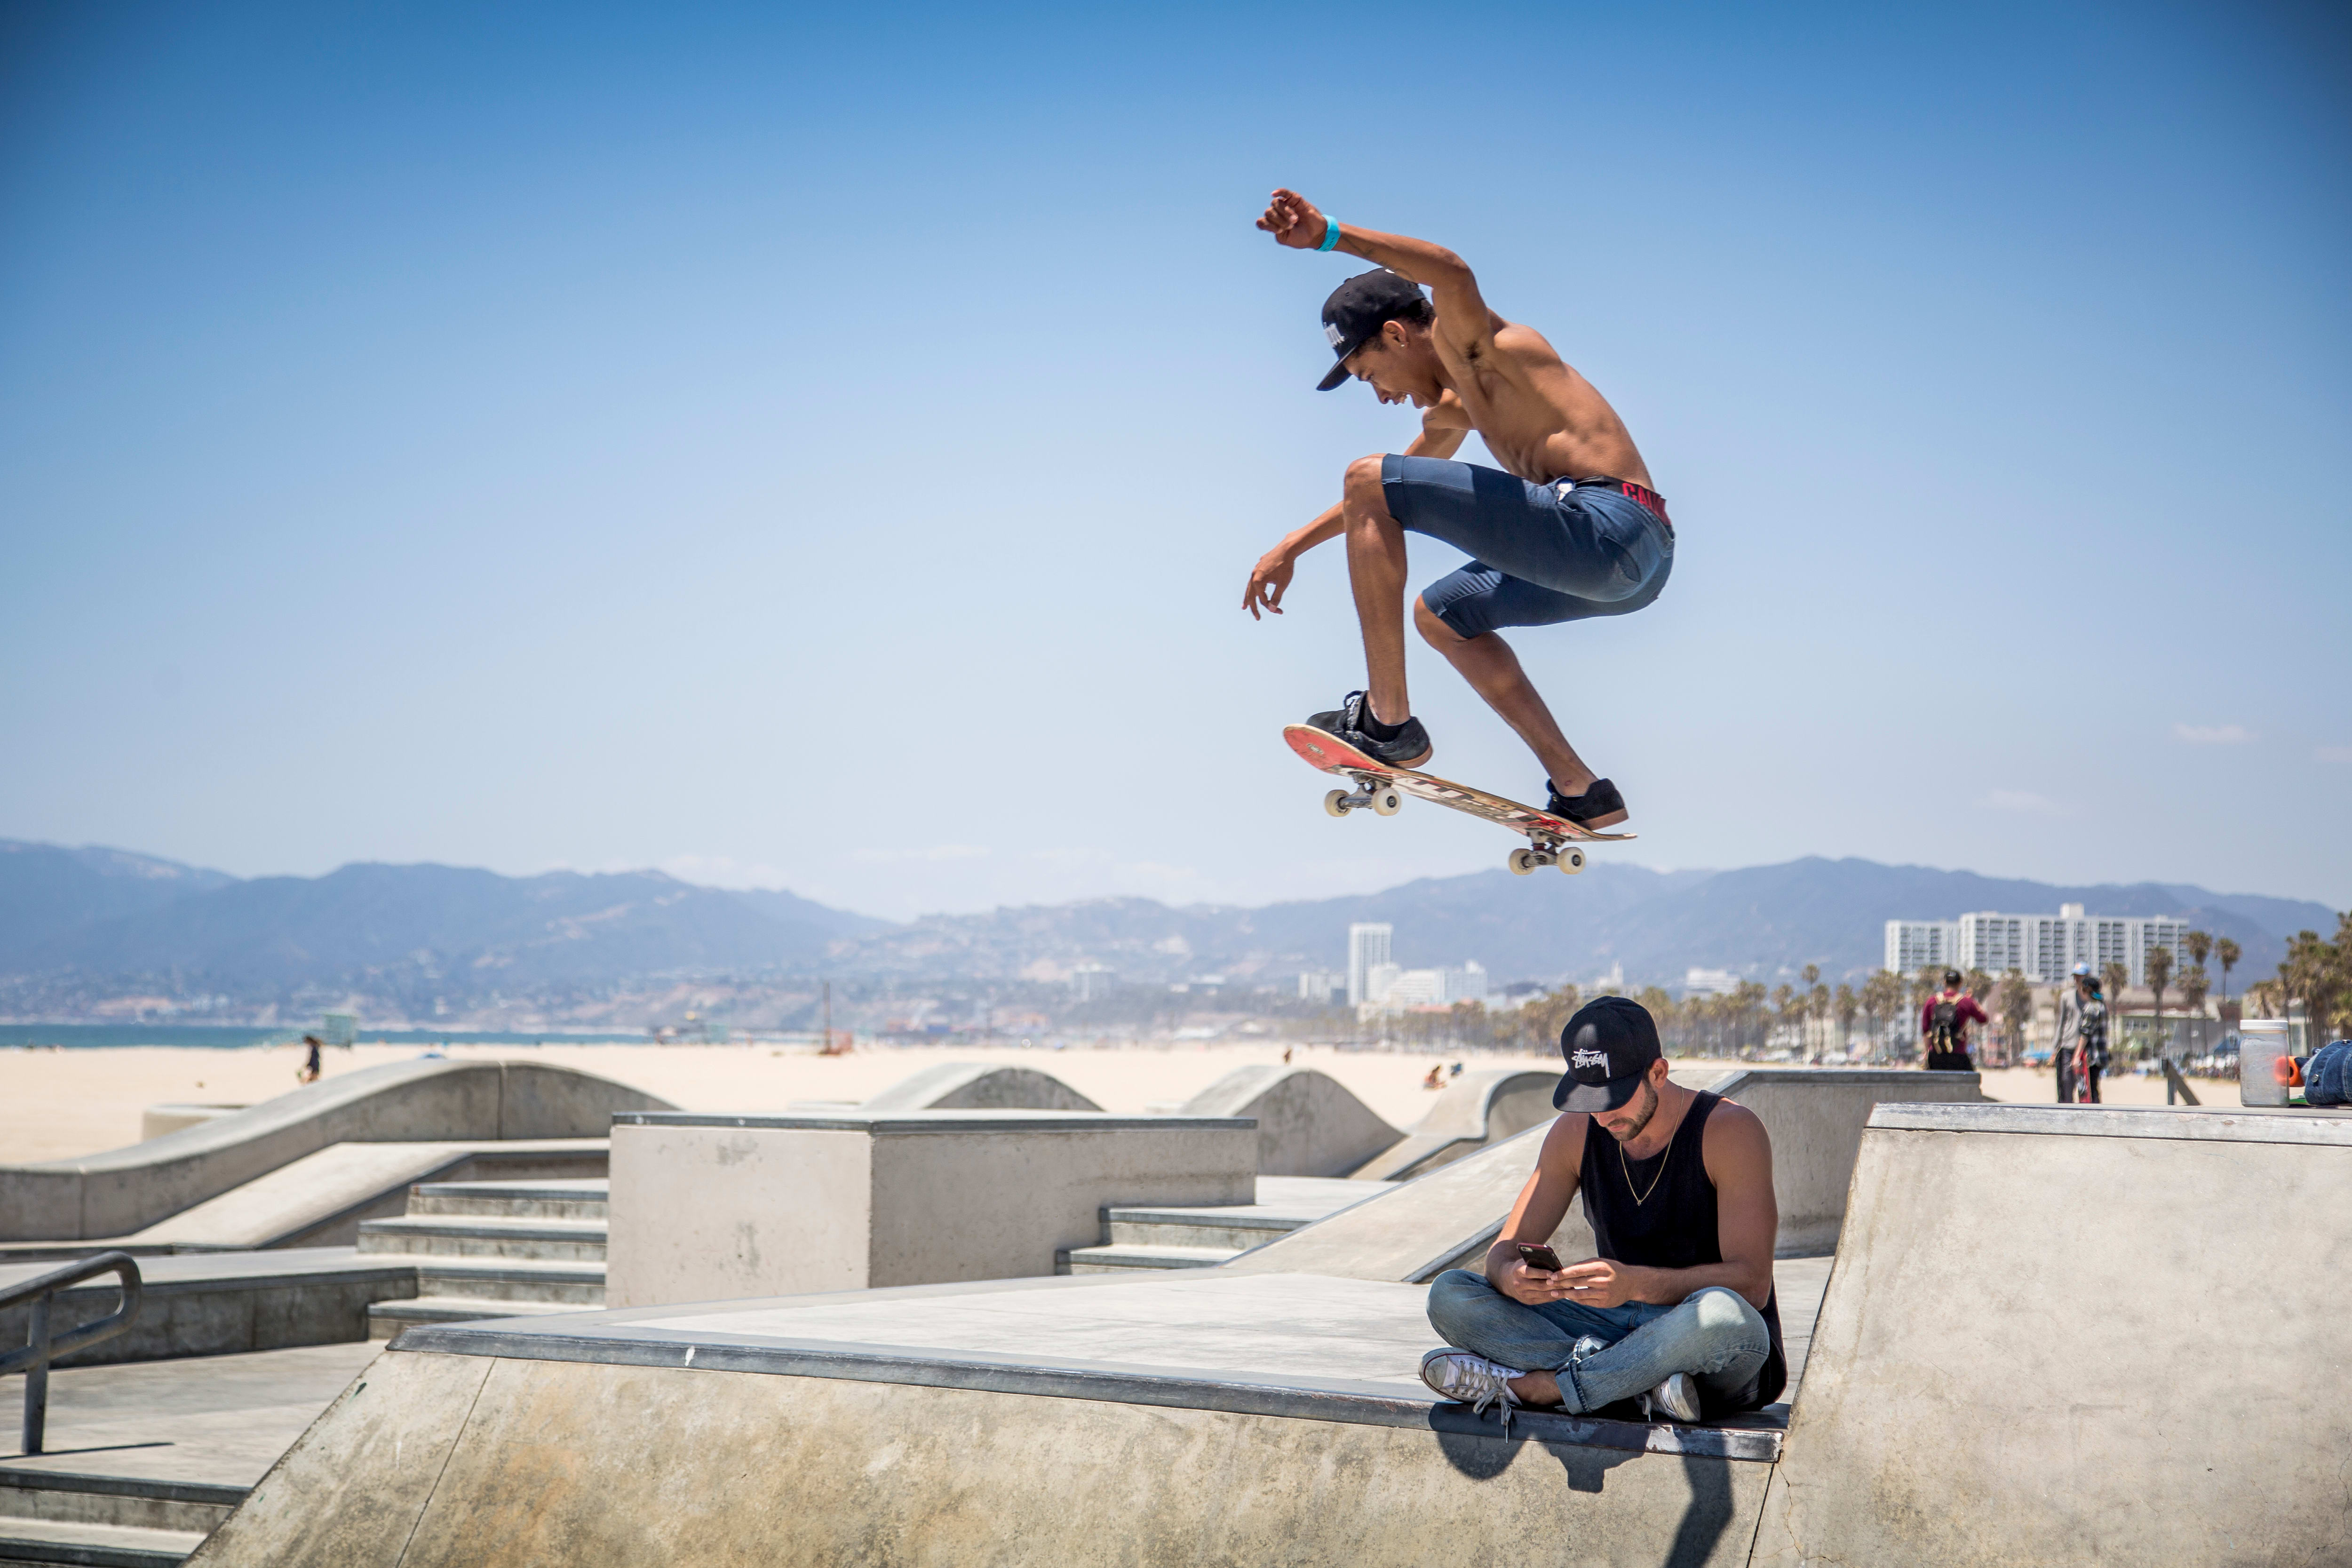 15 Skateboarding Facts Know